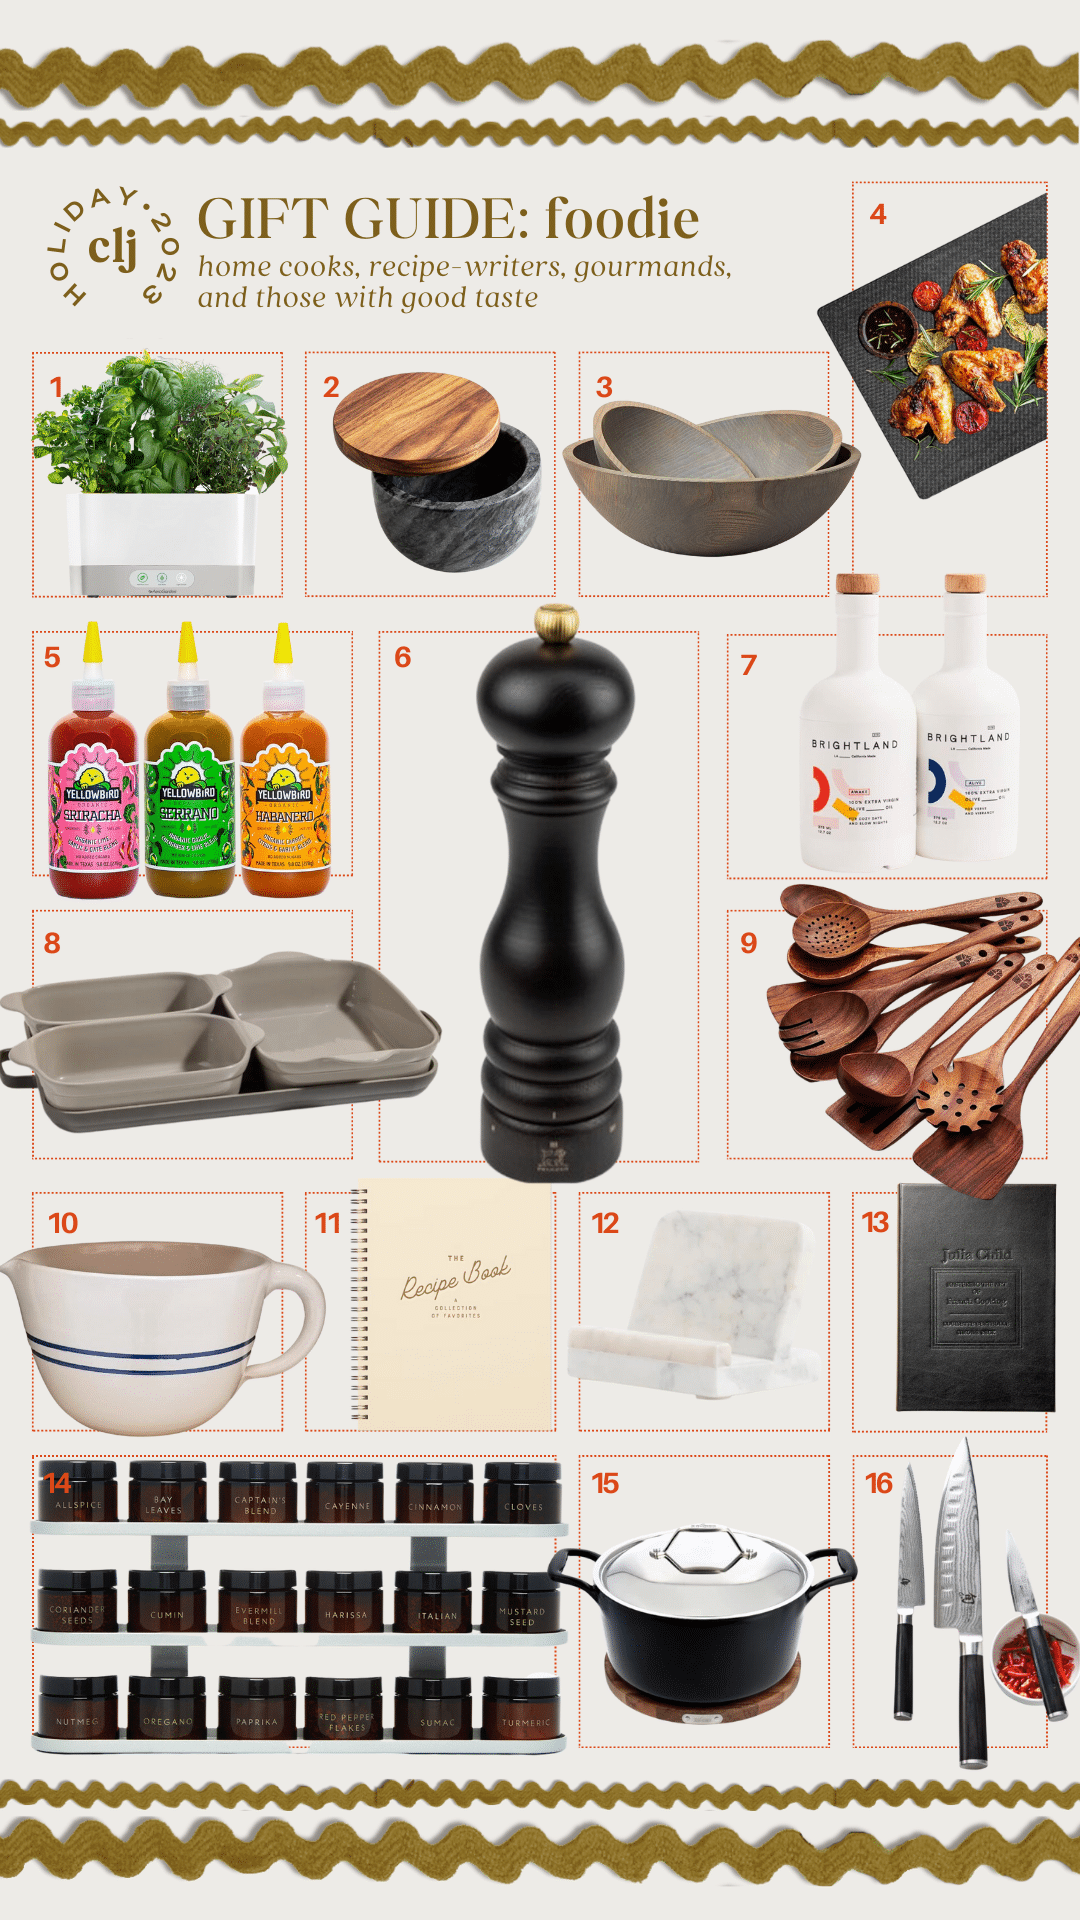 15 Unique Cooking Gifts for the Foodie in Your Life